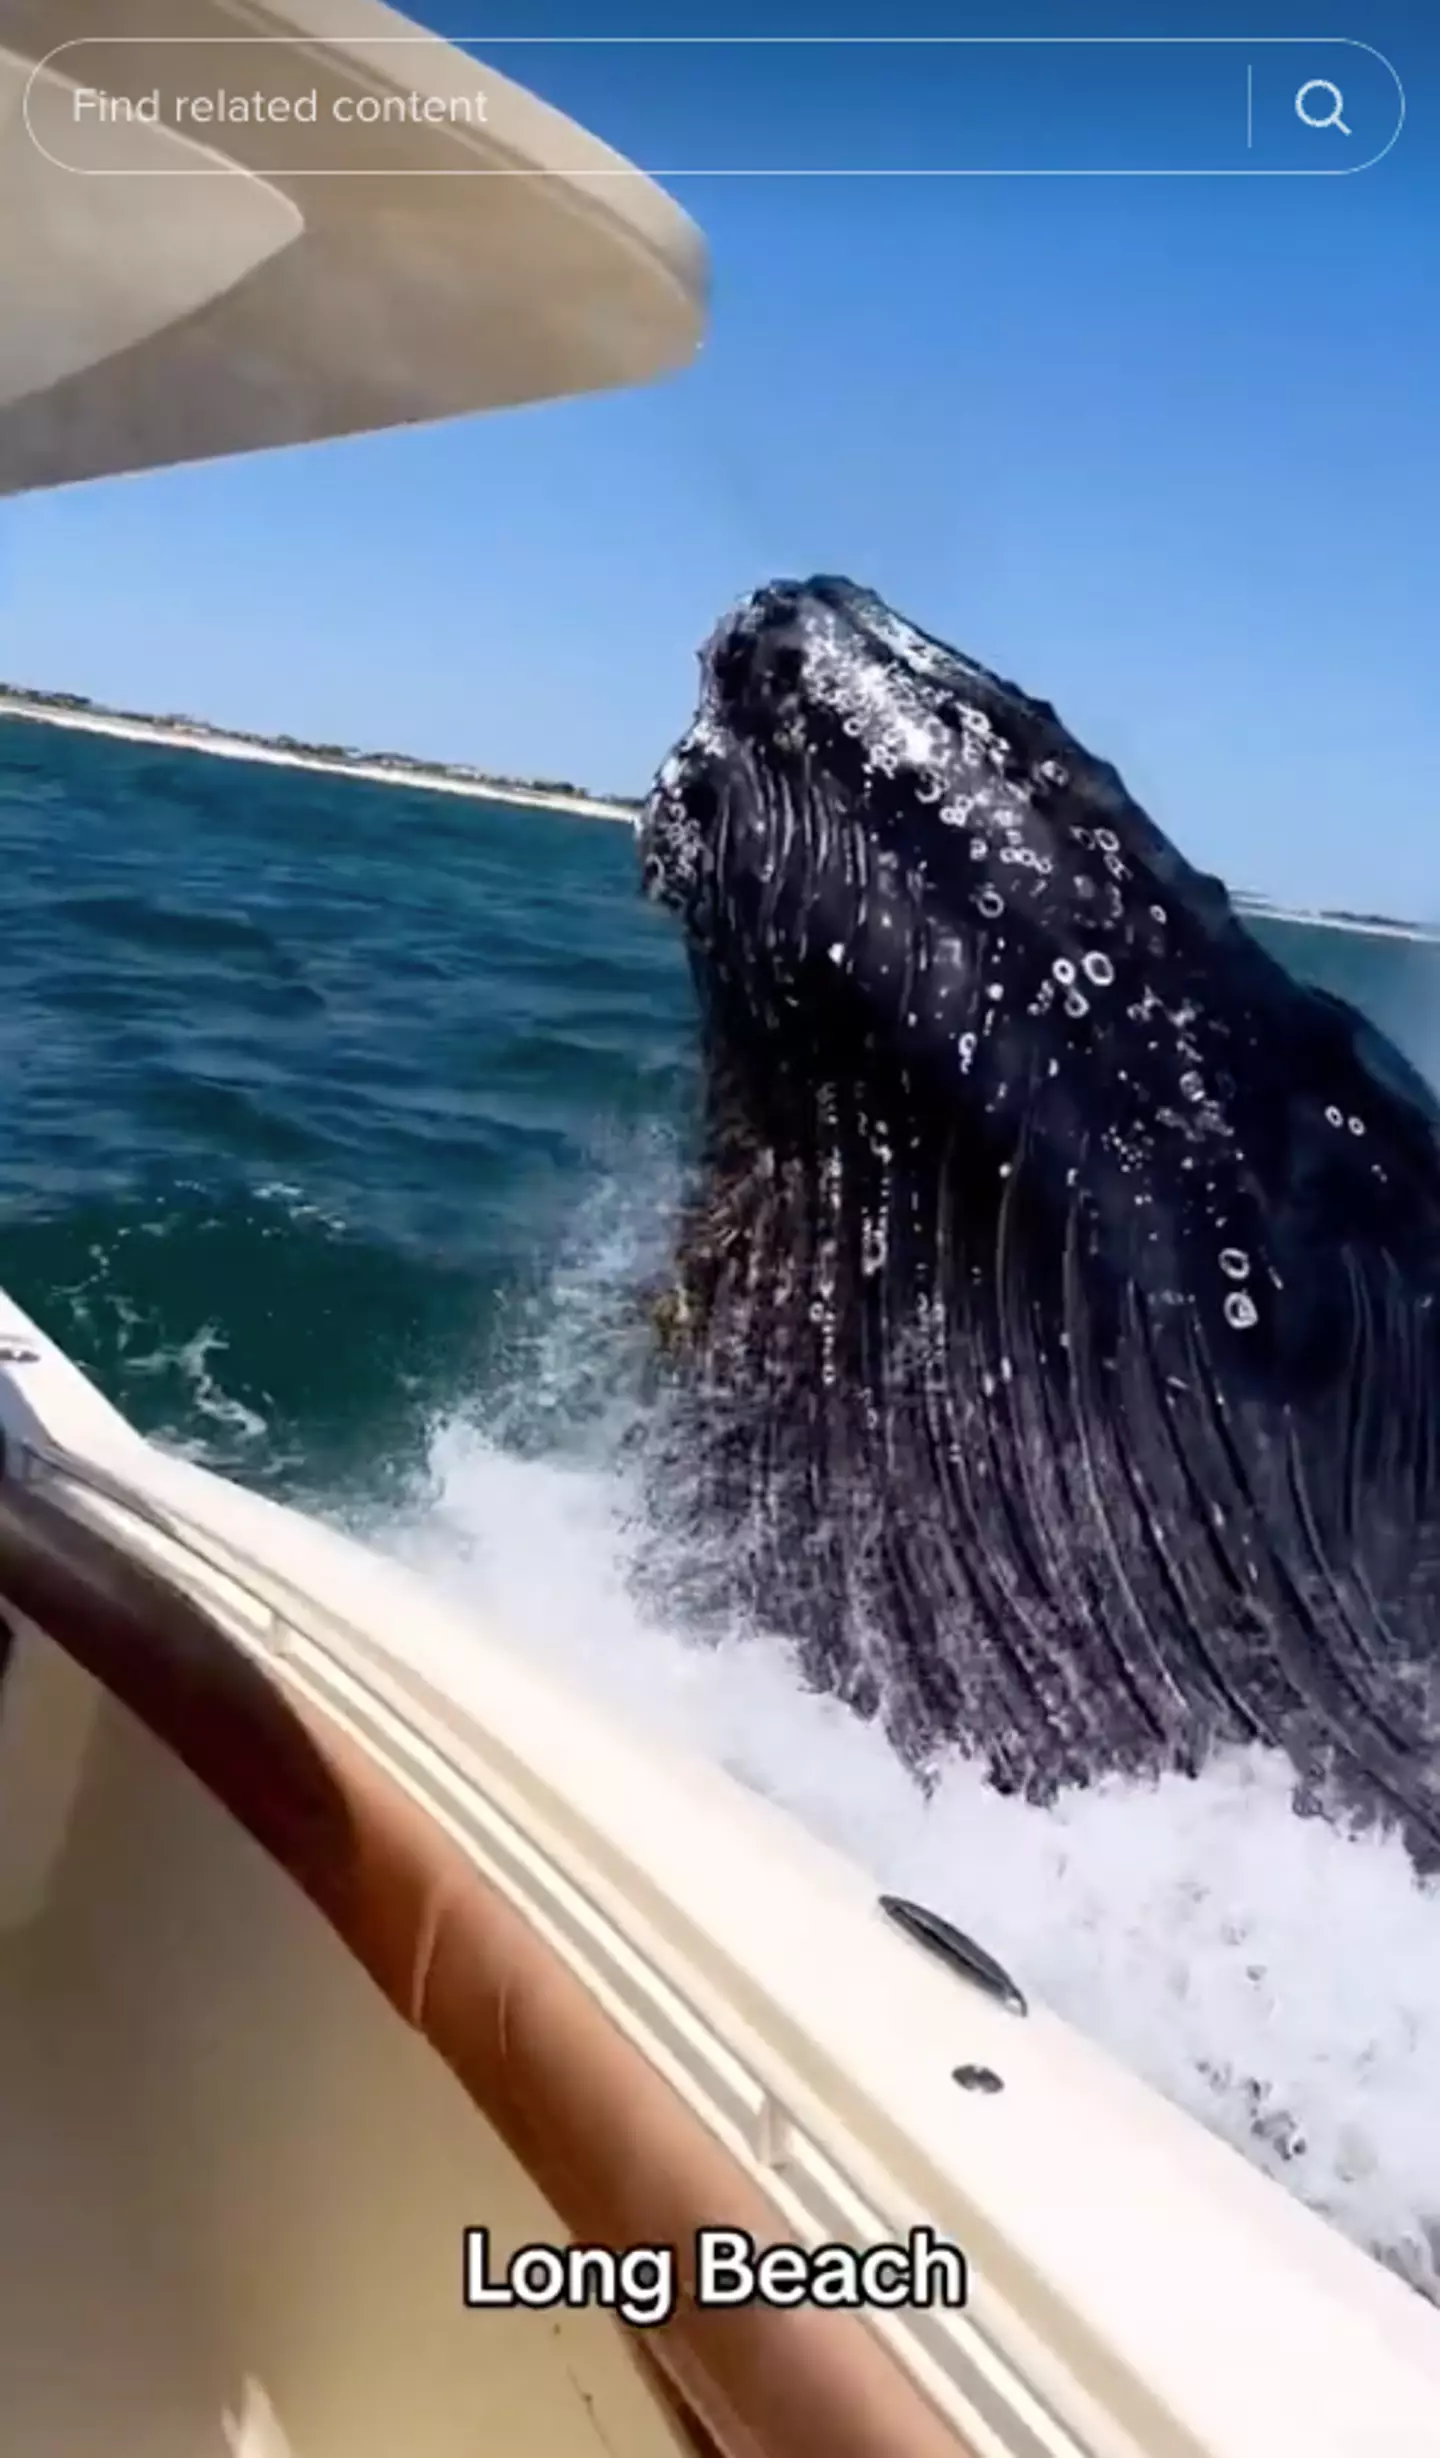 A whale gave some folks celebrating Memorial Day the fright of their lives.